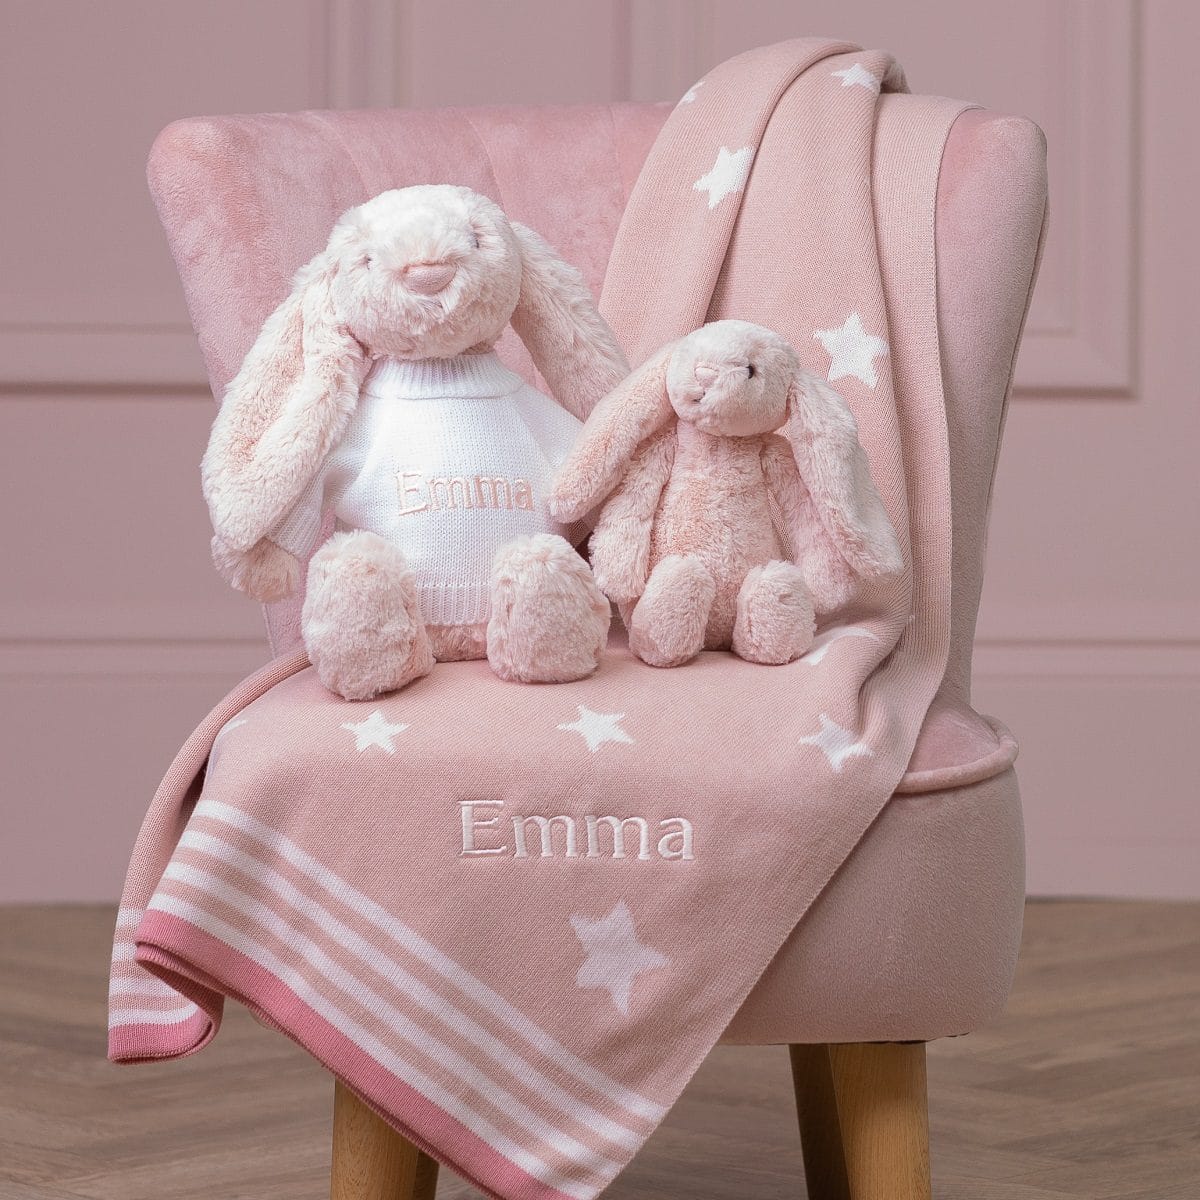 Personalised Jellycat pink bashful bunny and ziggle star baby blanket gift set